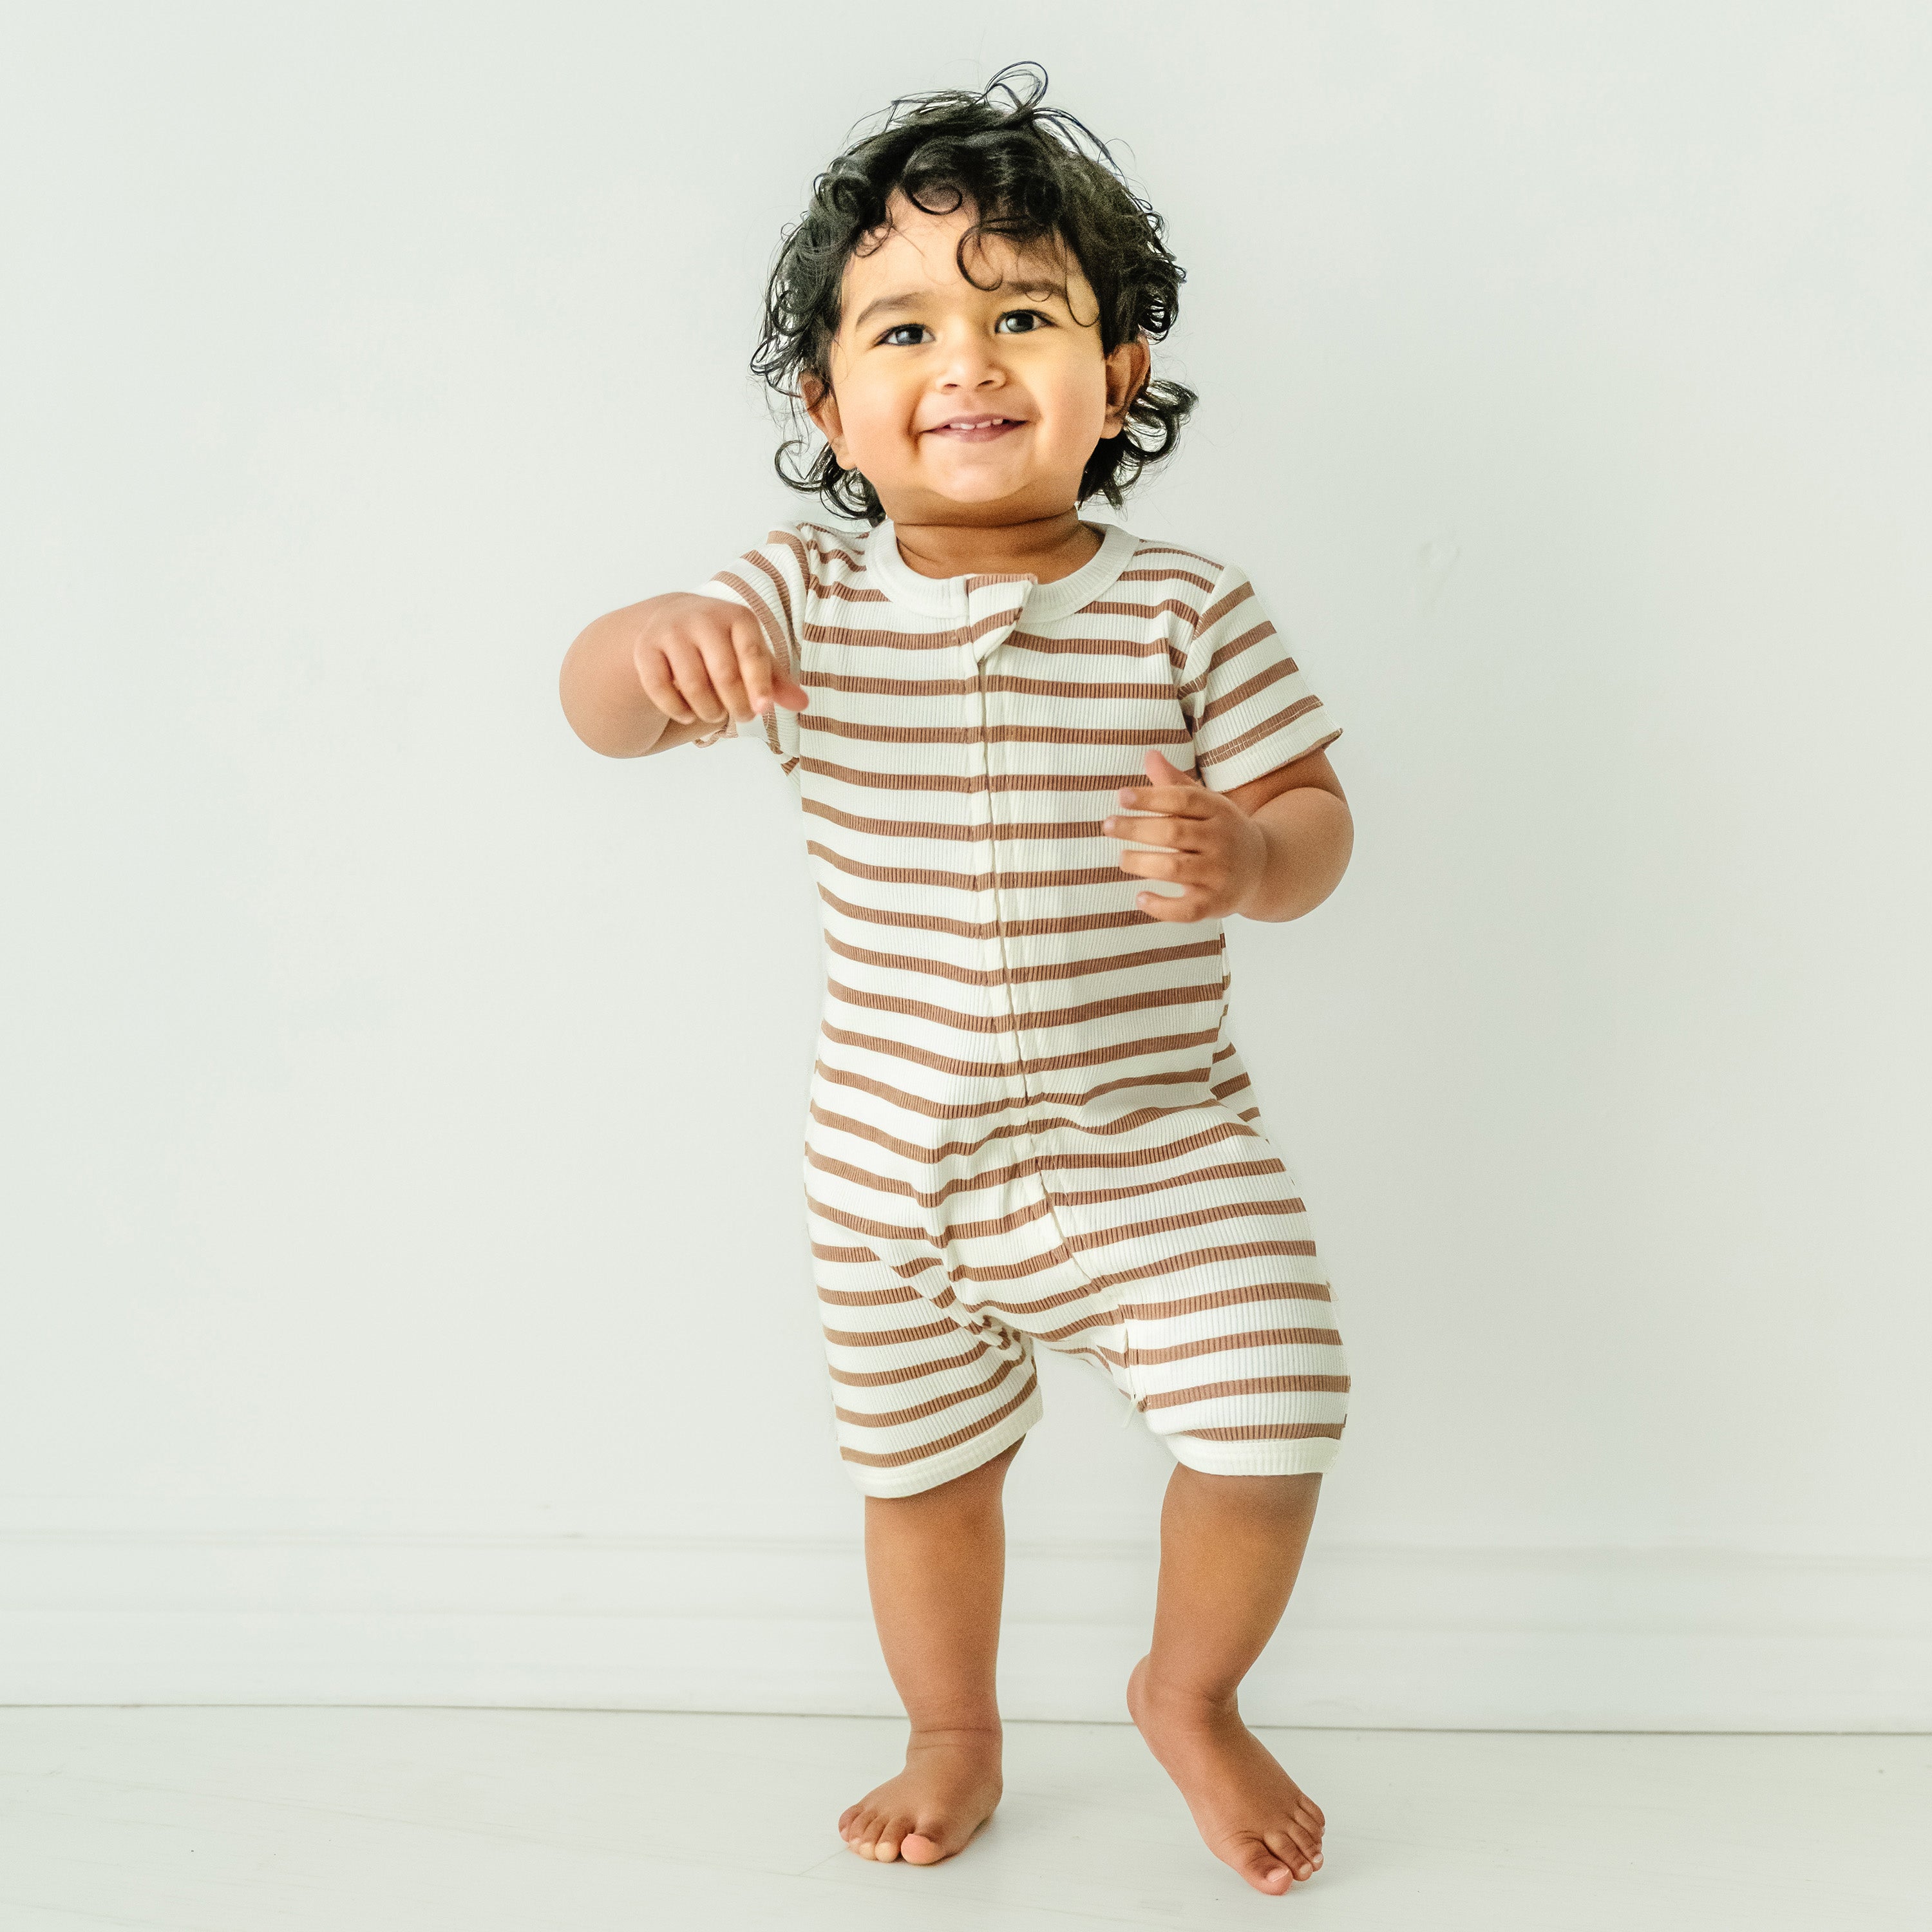 Toddler boy with curly hair, smiling and pointing, wearing a Makemake Organics Organic Short Zip Romper - Stripes against a plain white background.